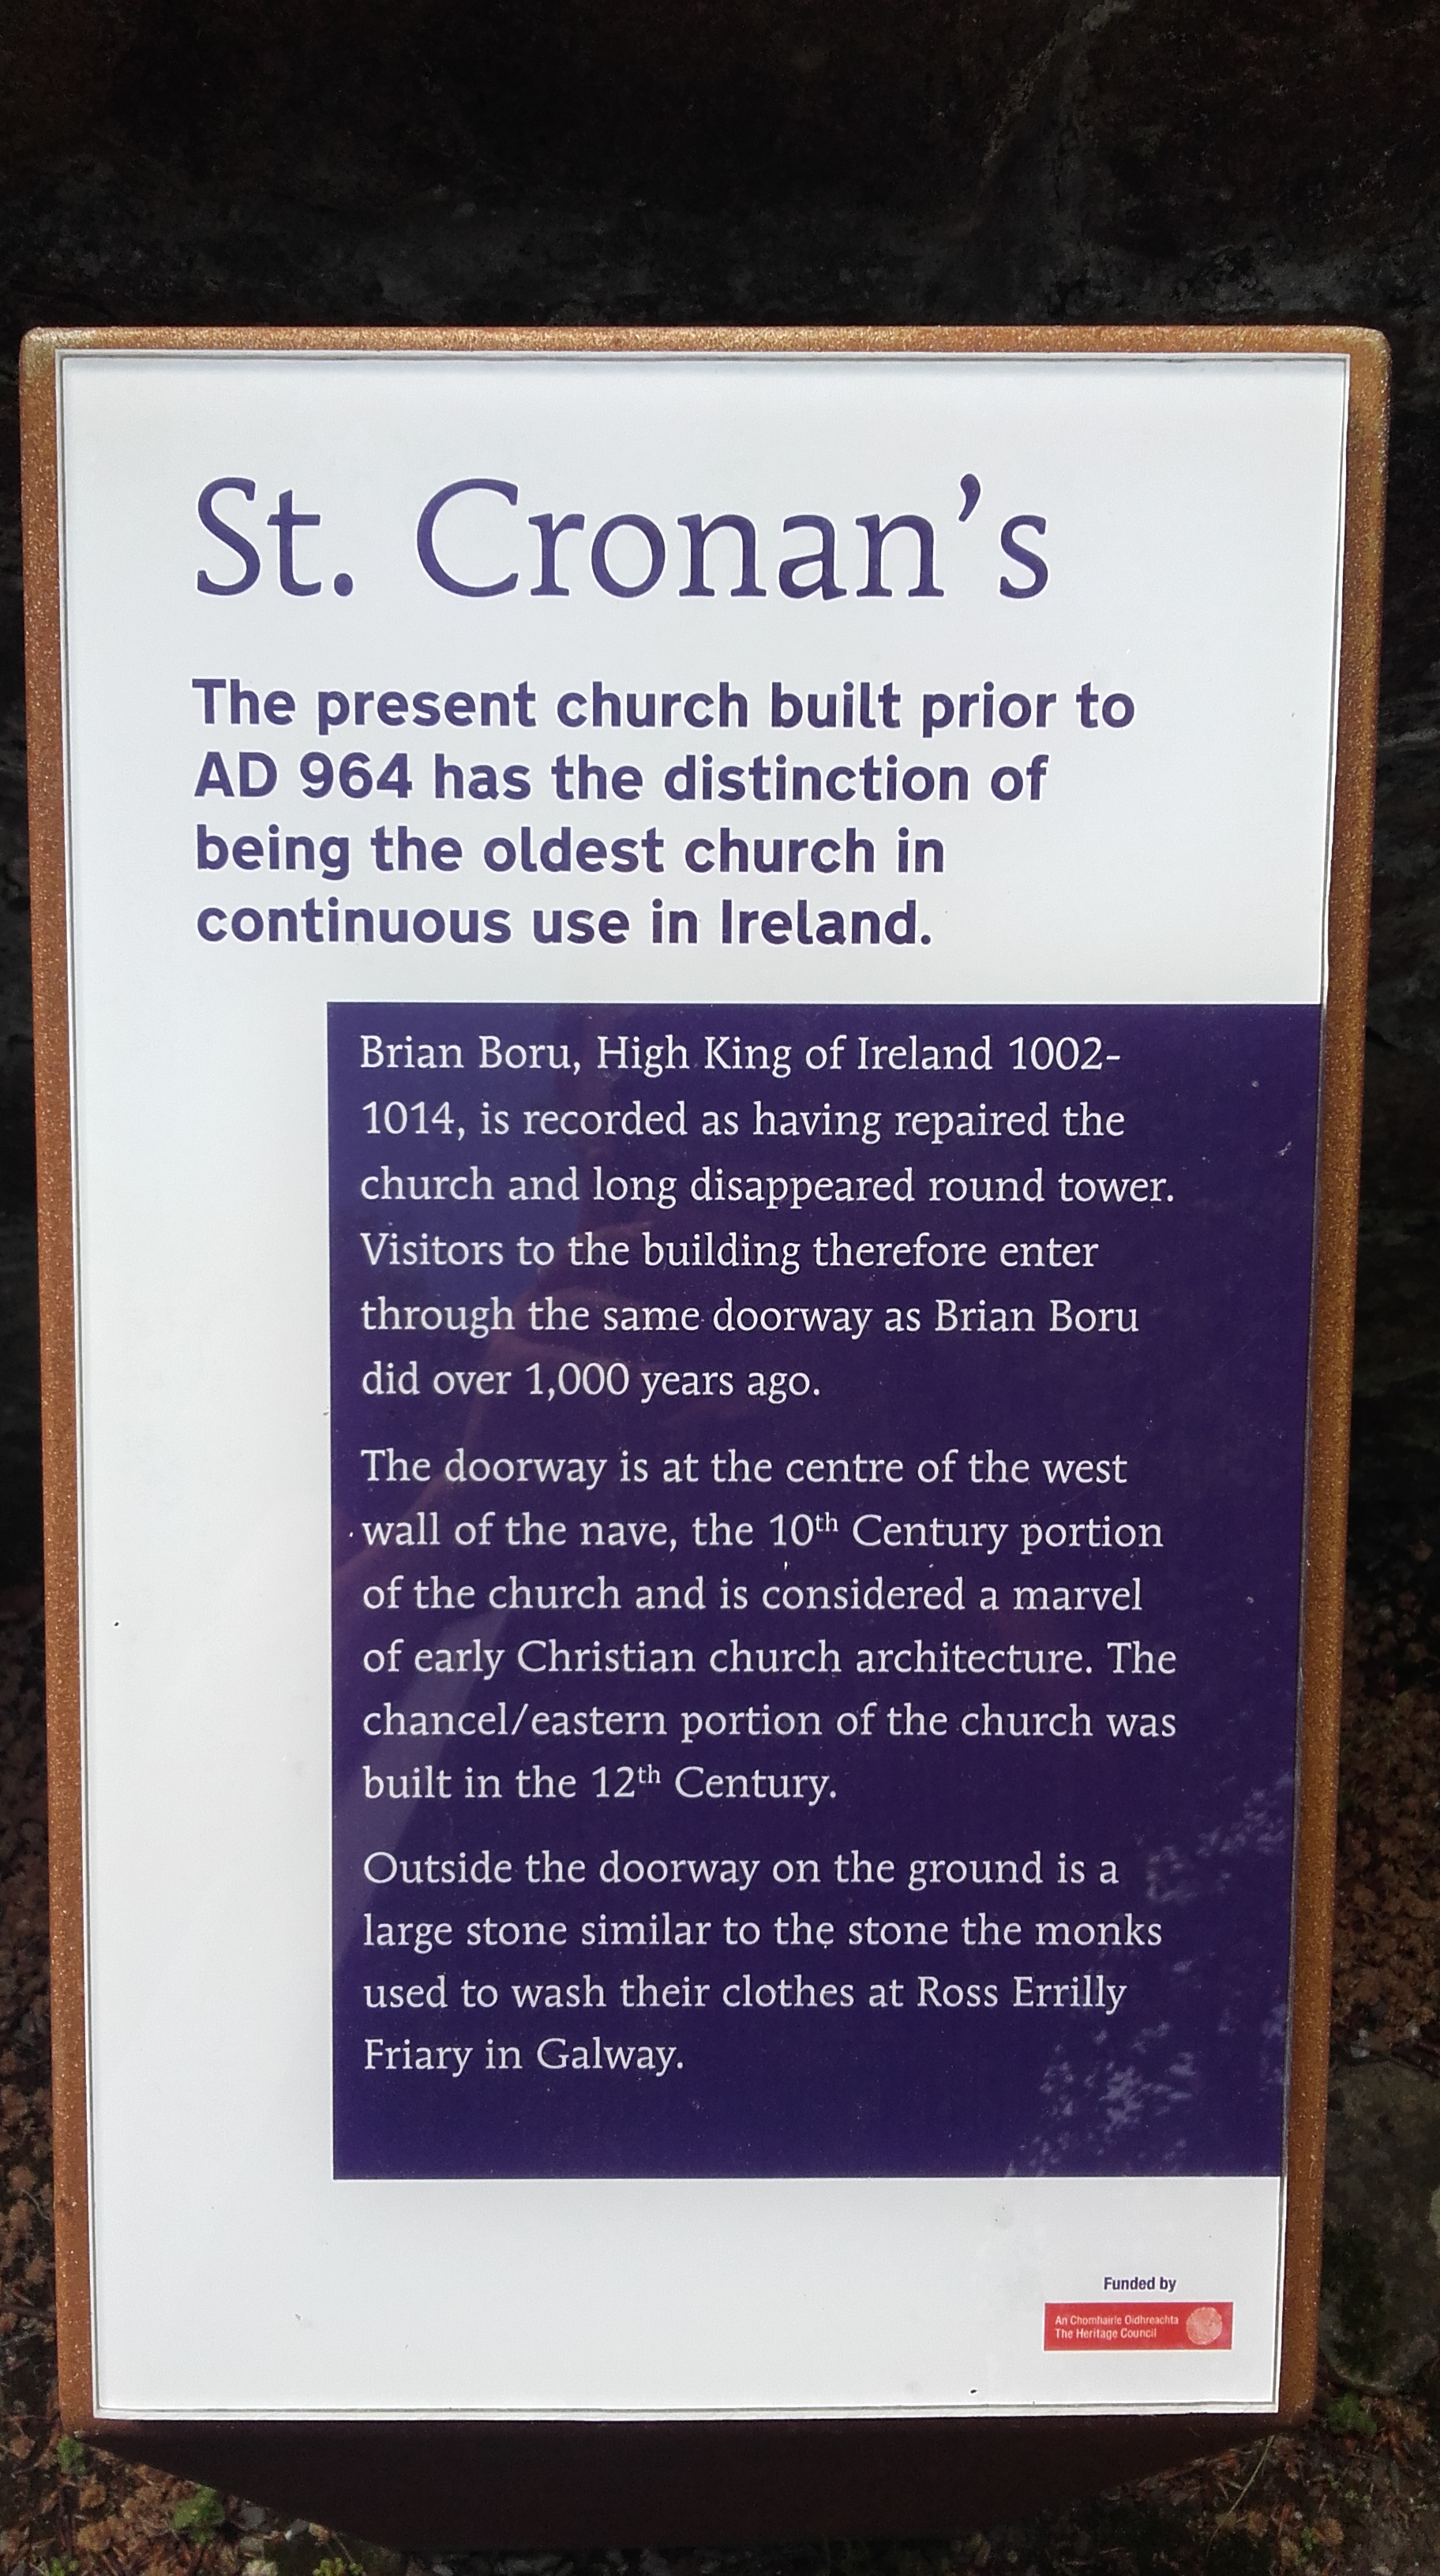 St. Cronan's church was built in 964 AD and is the oldest church in continuous use in Ireland. Brian Boru himself passed through its doors over 1000 years ago.